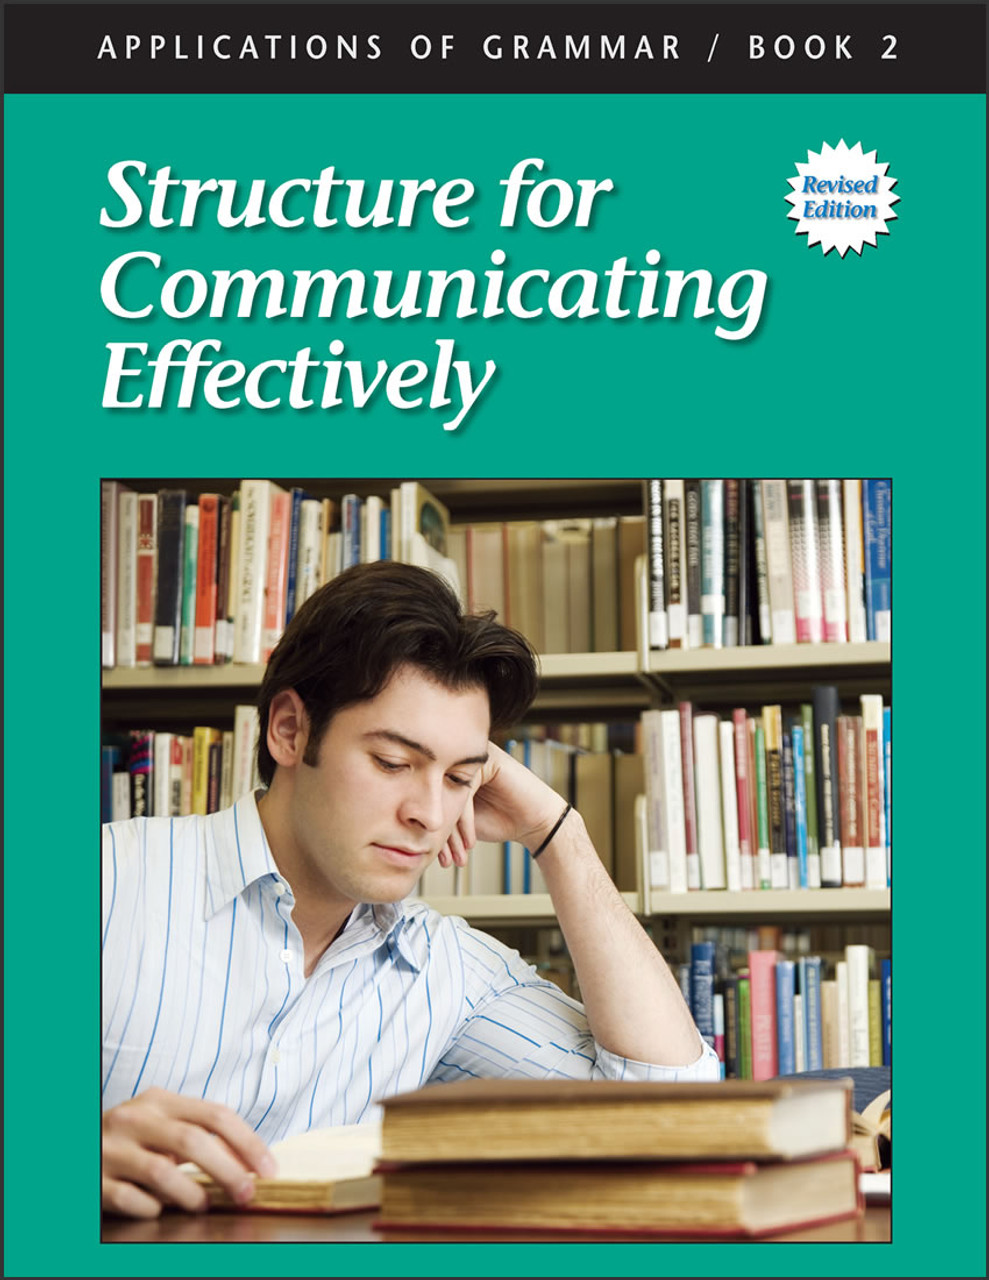 Applications of Grammar Book 2: Structure for Communicating Effectively